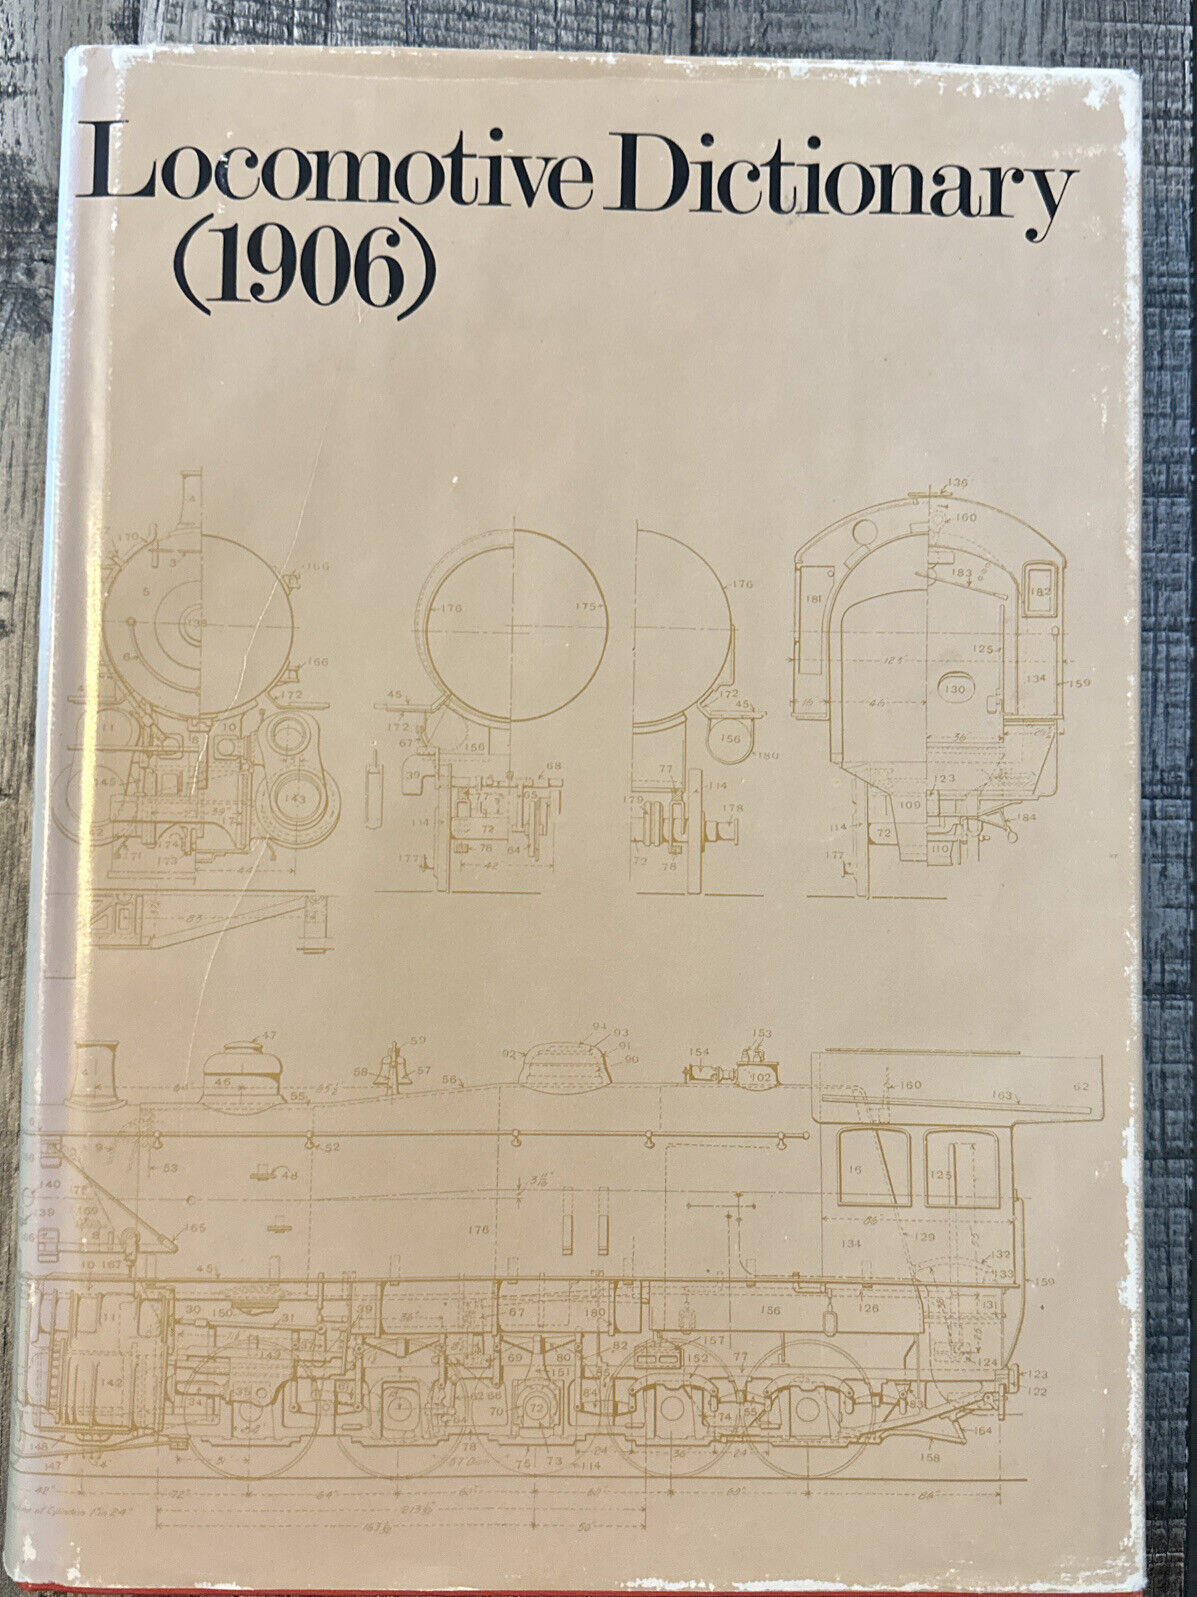 Locomotive Dictionary 1906 by George Fowler HC 1972 First Edition RARE